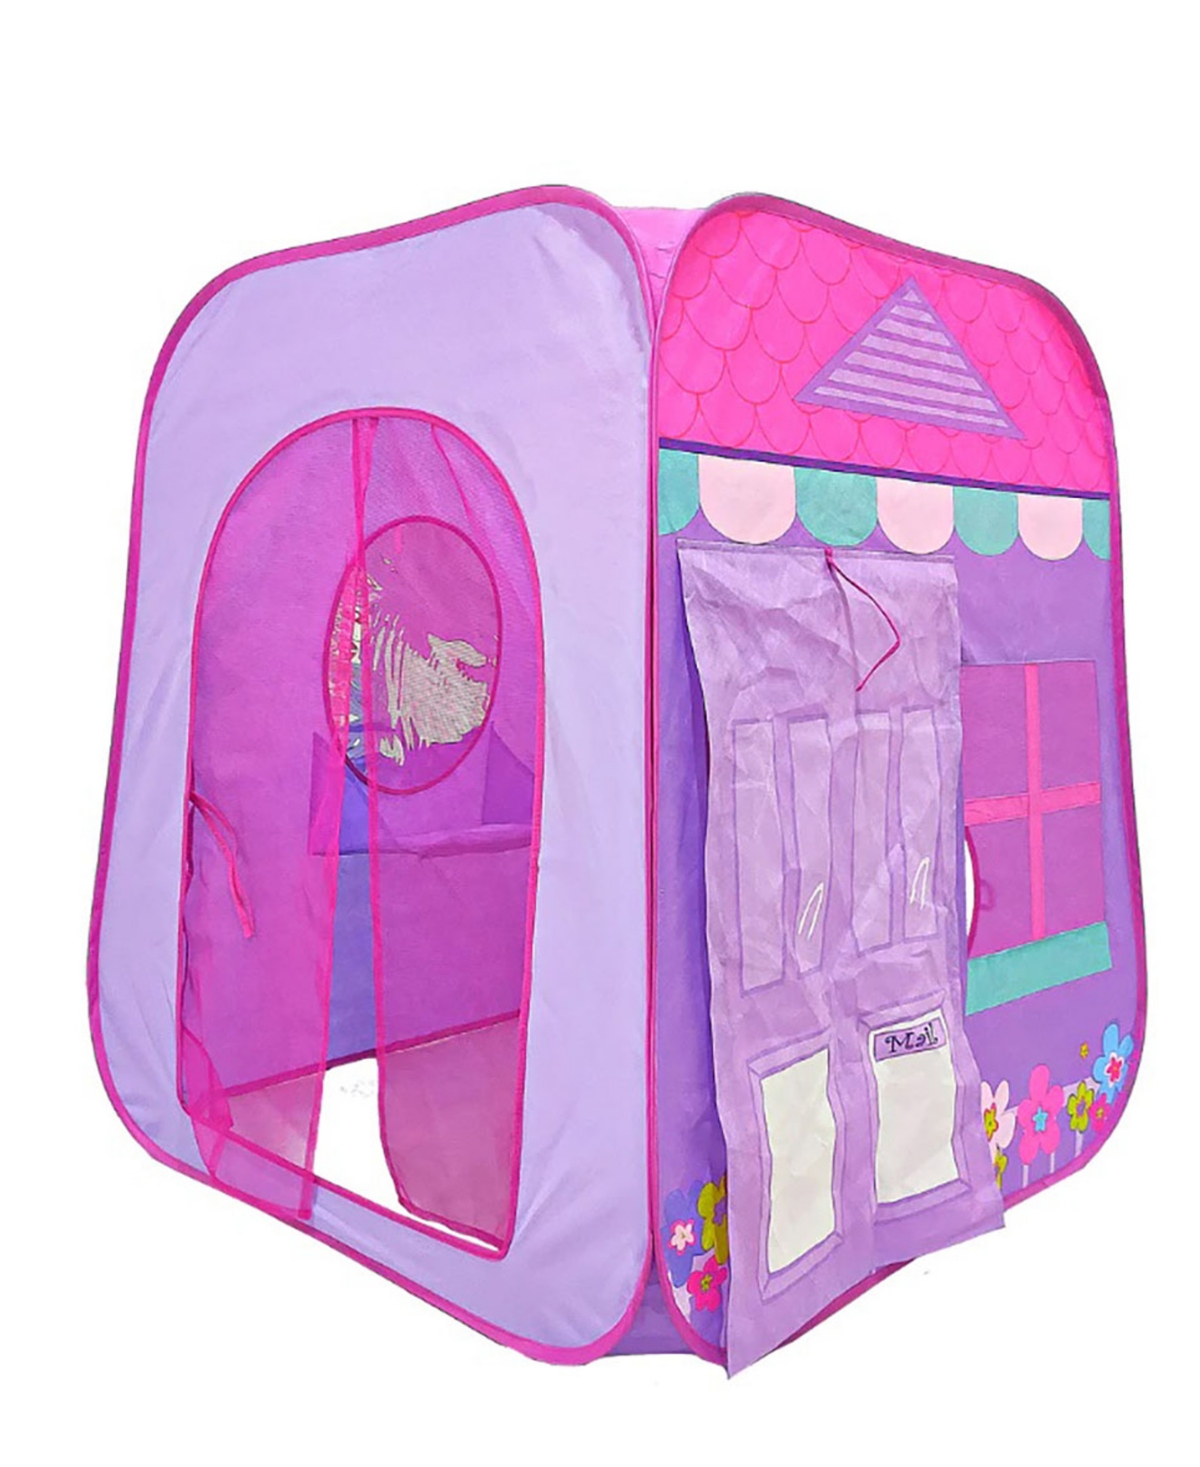 M&m Sales Enterprises Blossom House Pop-up Play Tent In Purple,pink